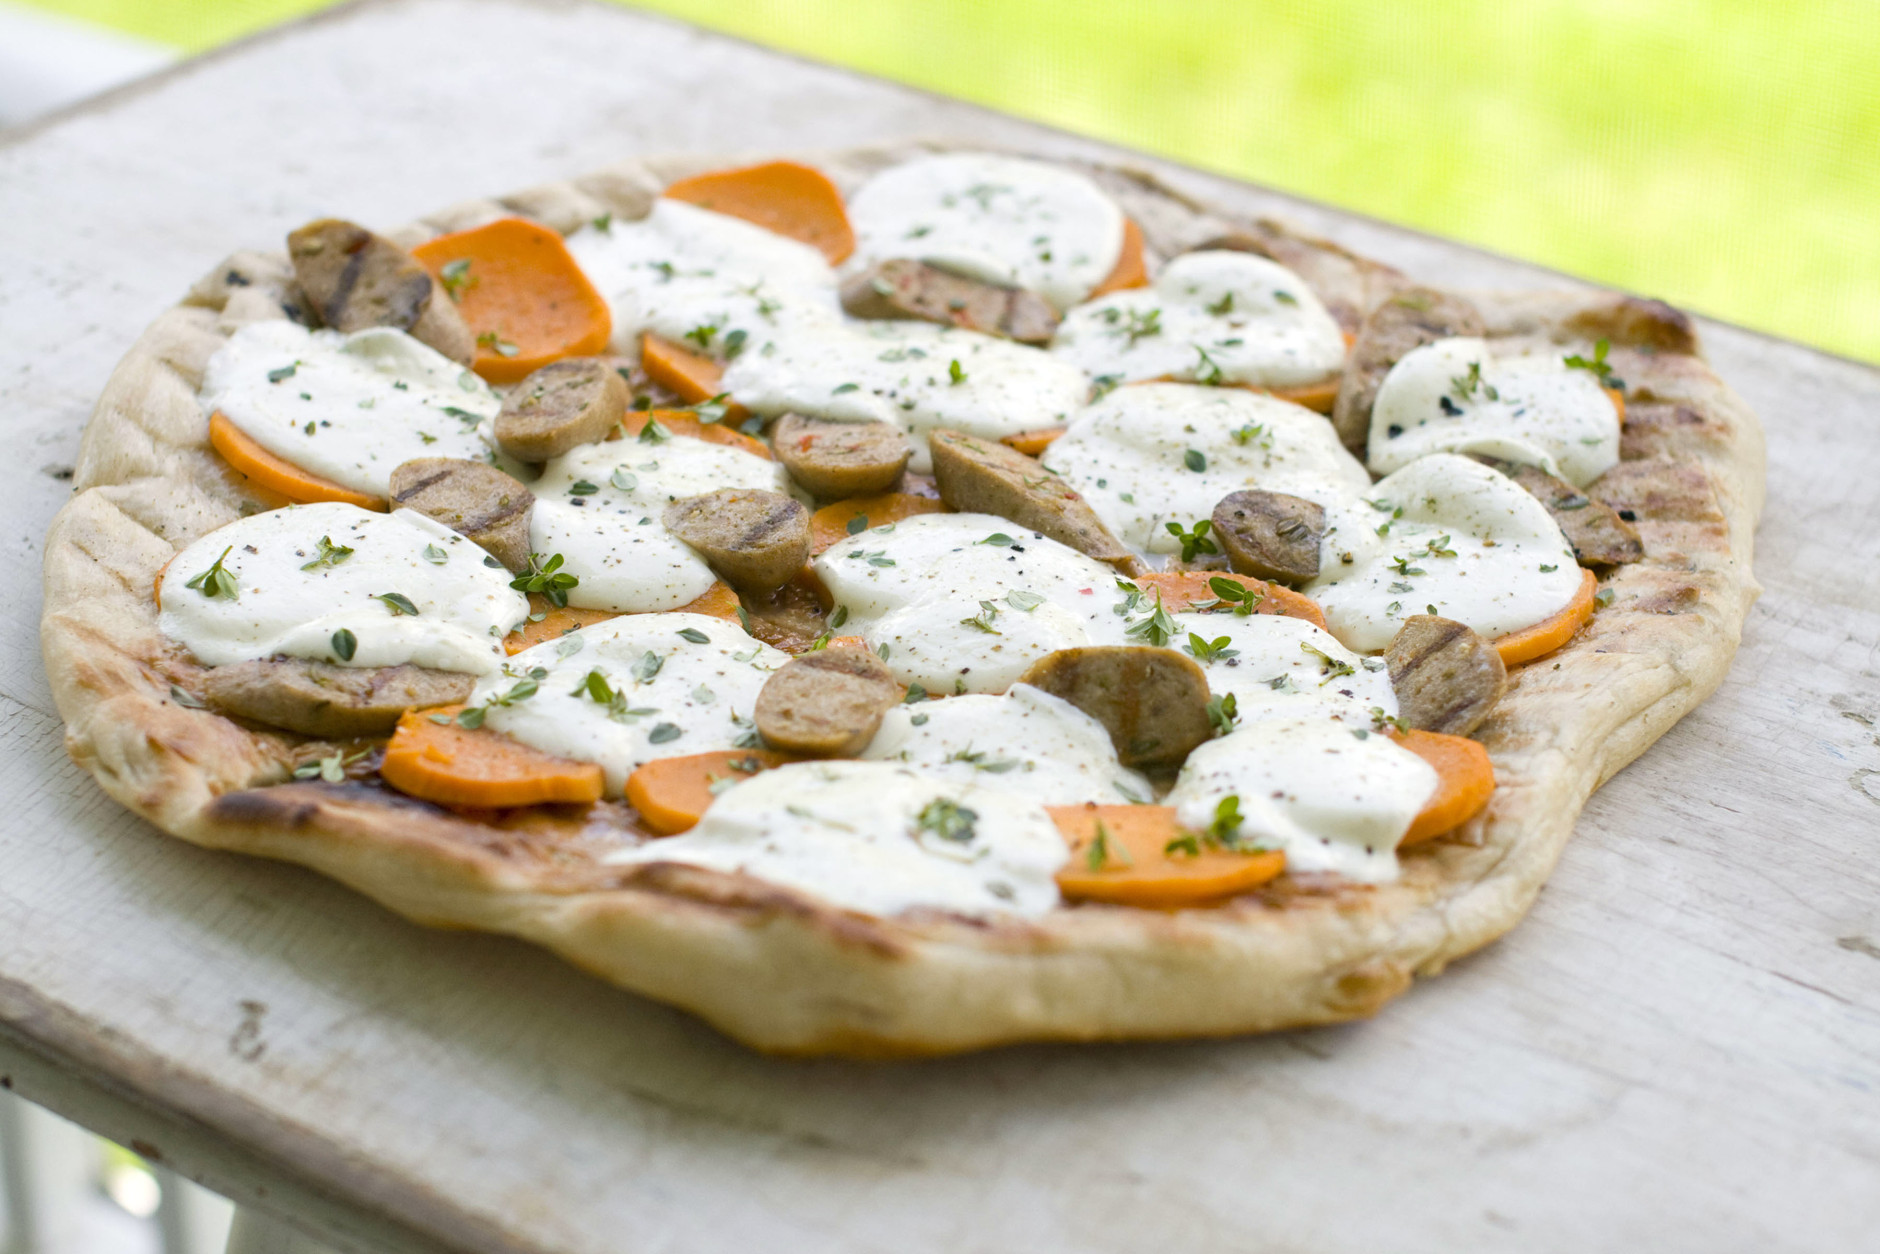 This May 23, 2011 photo shows grilled sweet potato and sausage pizza in Concord, N.H. Grilling infuses pizza with a wonderful smoky flavor and a crisp, chewy crust.     (AP Photo/Matthew Mead)